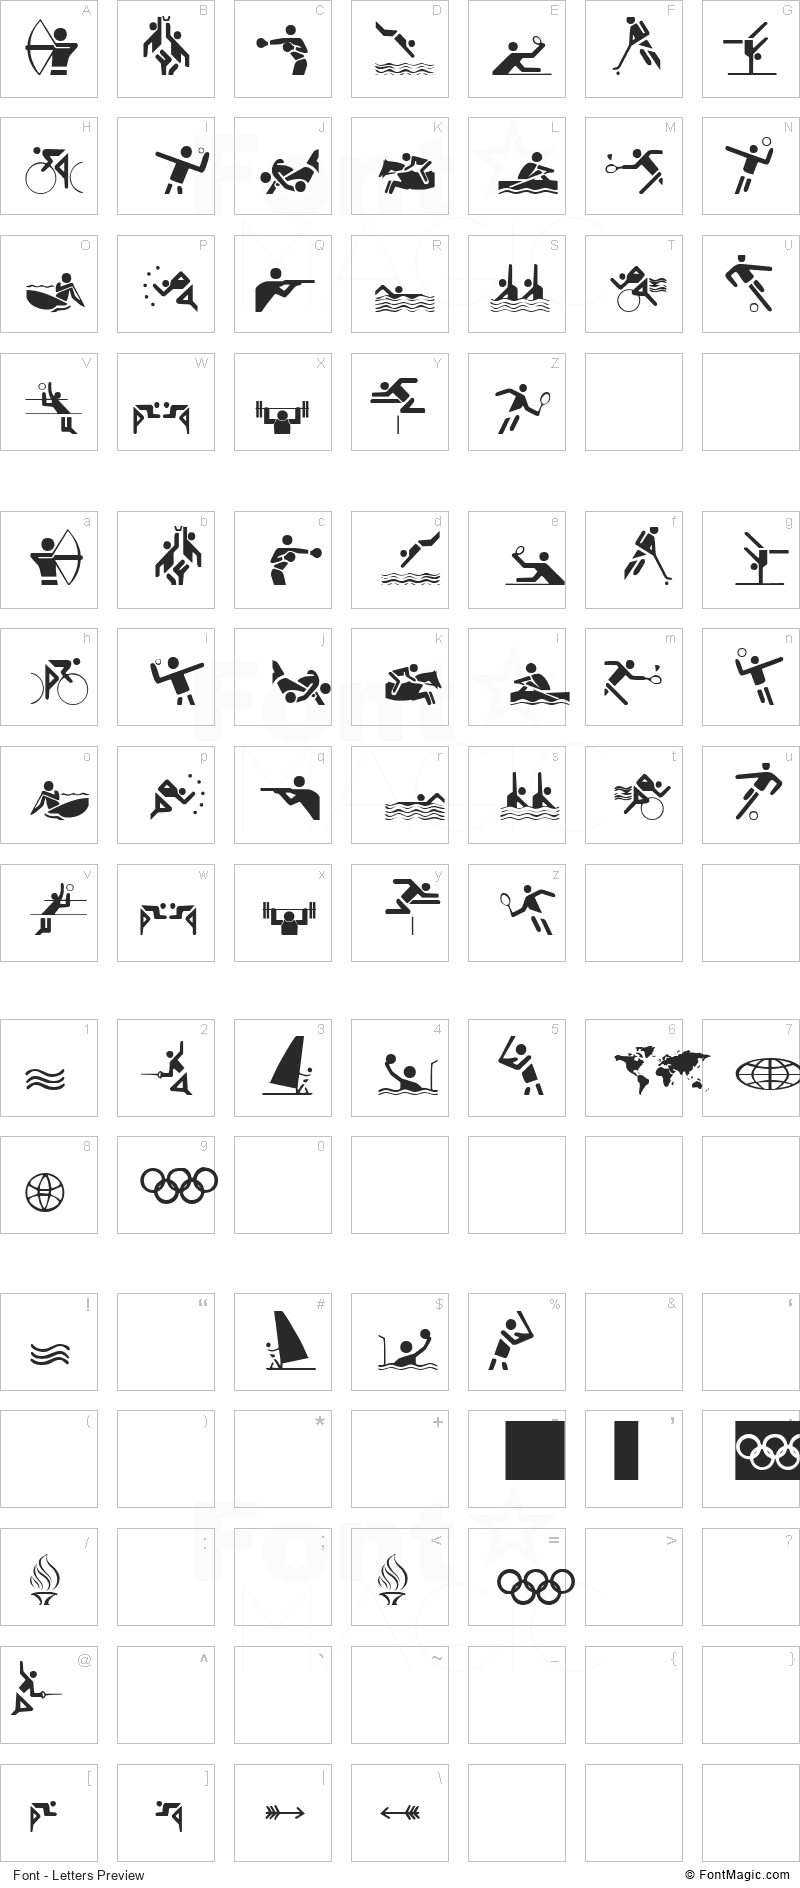 Olympicons Font - All Latters Preview Chart